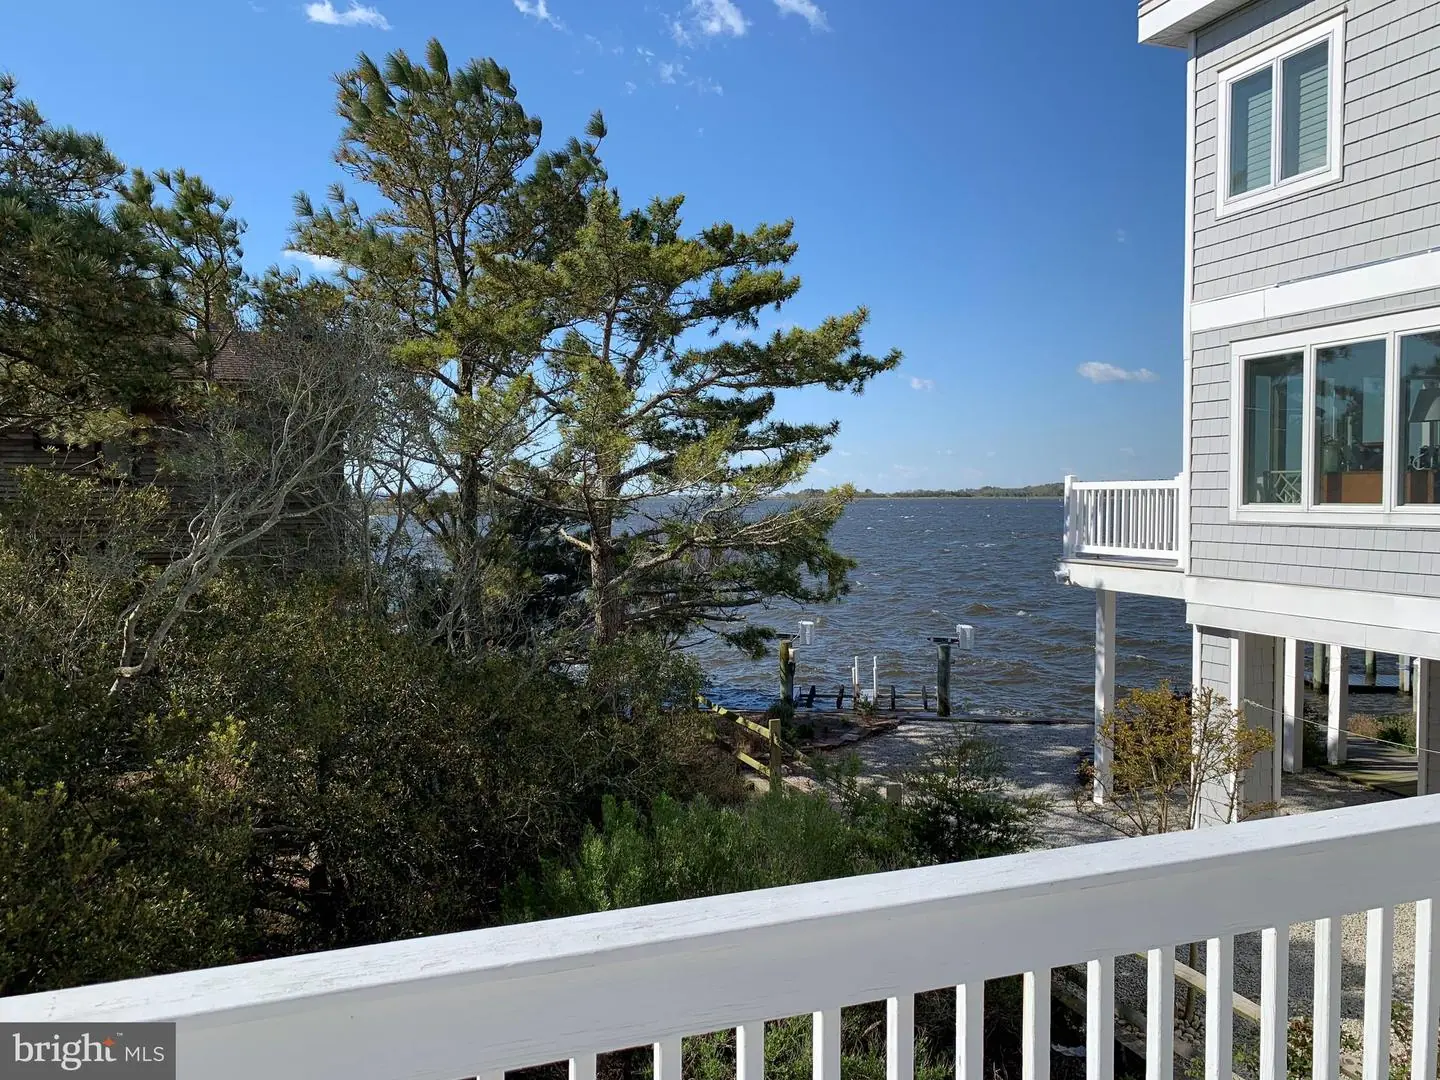 DESU164670-304207560343-2021-07-17-02-03-16 35199 Hassell Ave | Bethany Beach, DE Real Estate For Sale | MLS# Desu164670  - 1st Choice Properties